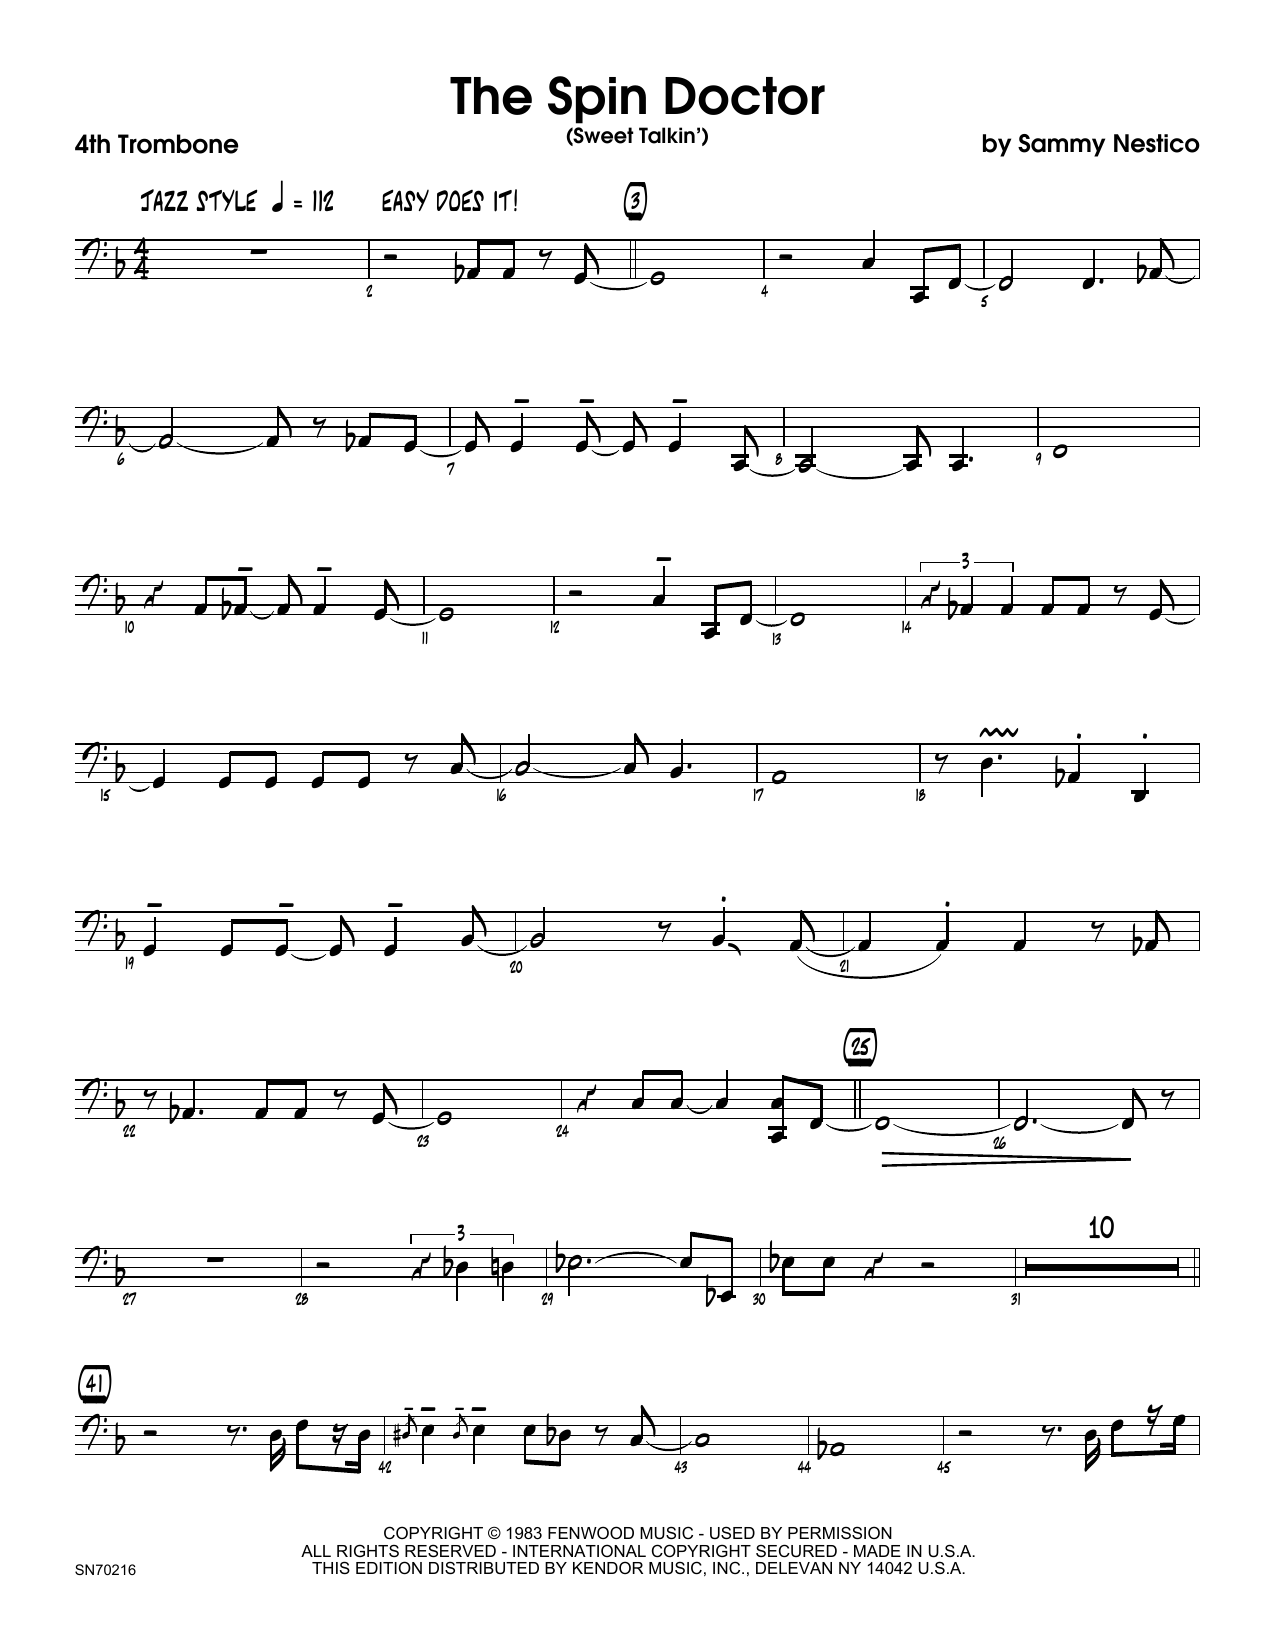 Download Sammy Nestico The Spin Doctor (Sweet Talkin') - 4th T Sheet Music